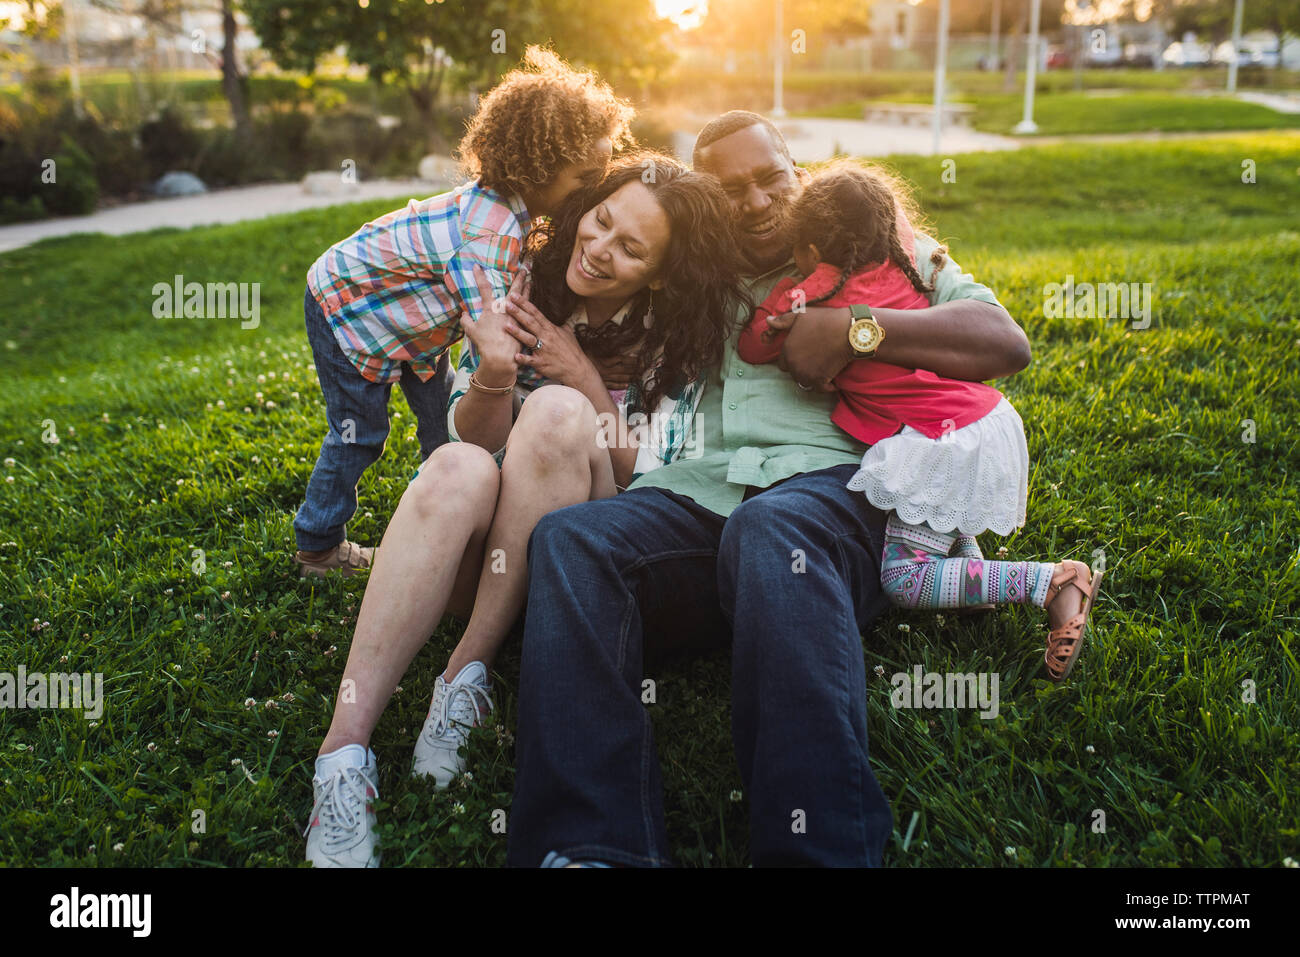 Children embracing parents on grassy field at park during sunset Stock Photo